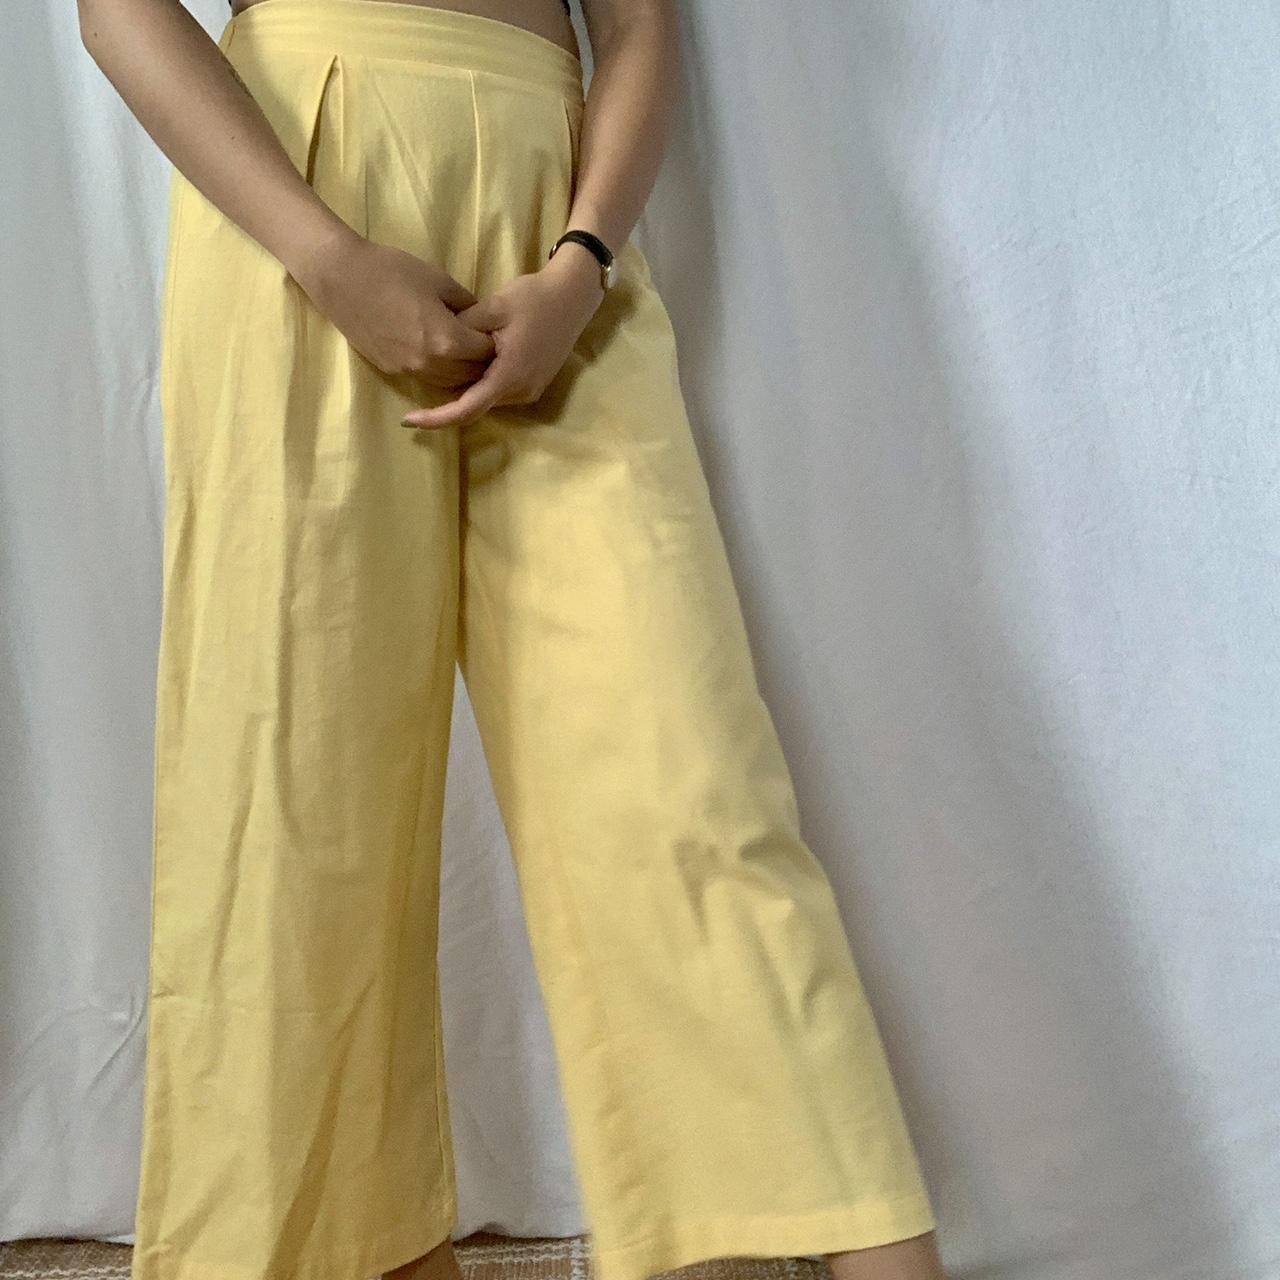 Product Image 1 - YELLOW LINEN PANTS

~ free shipping